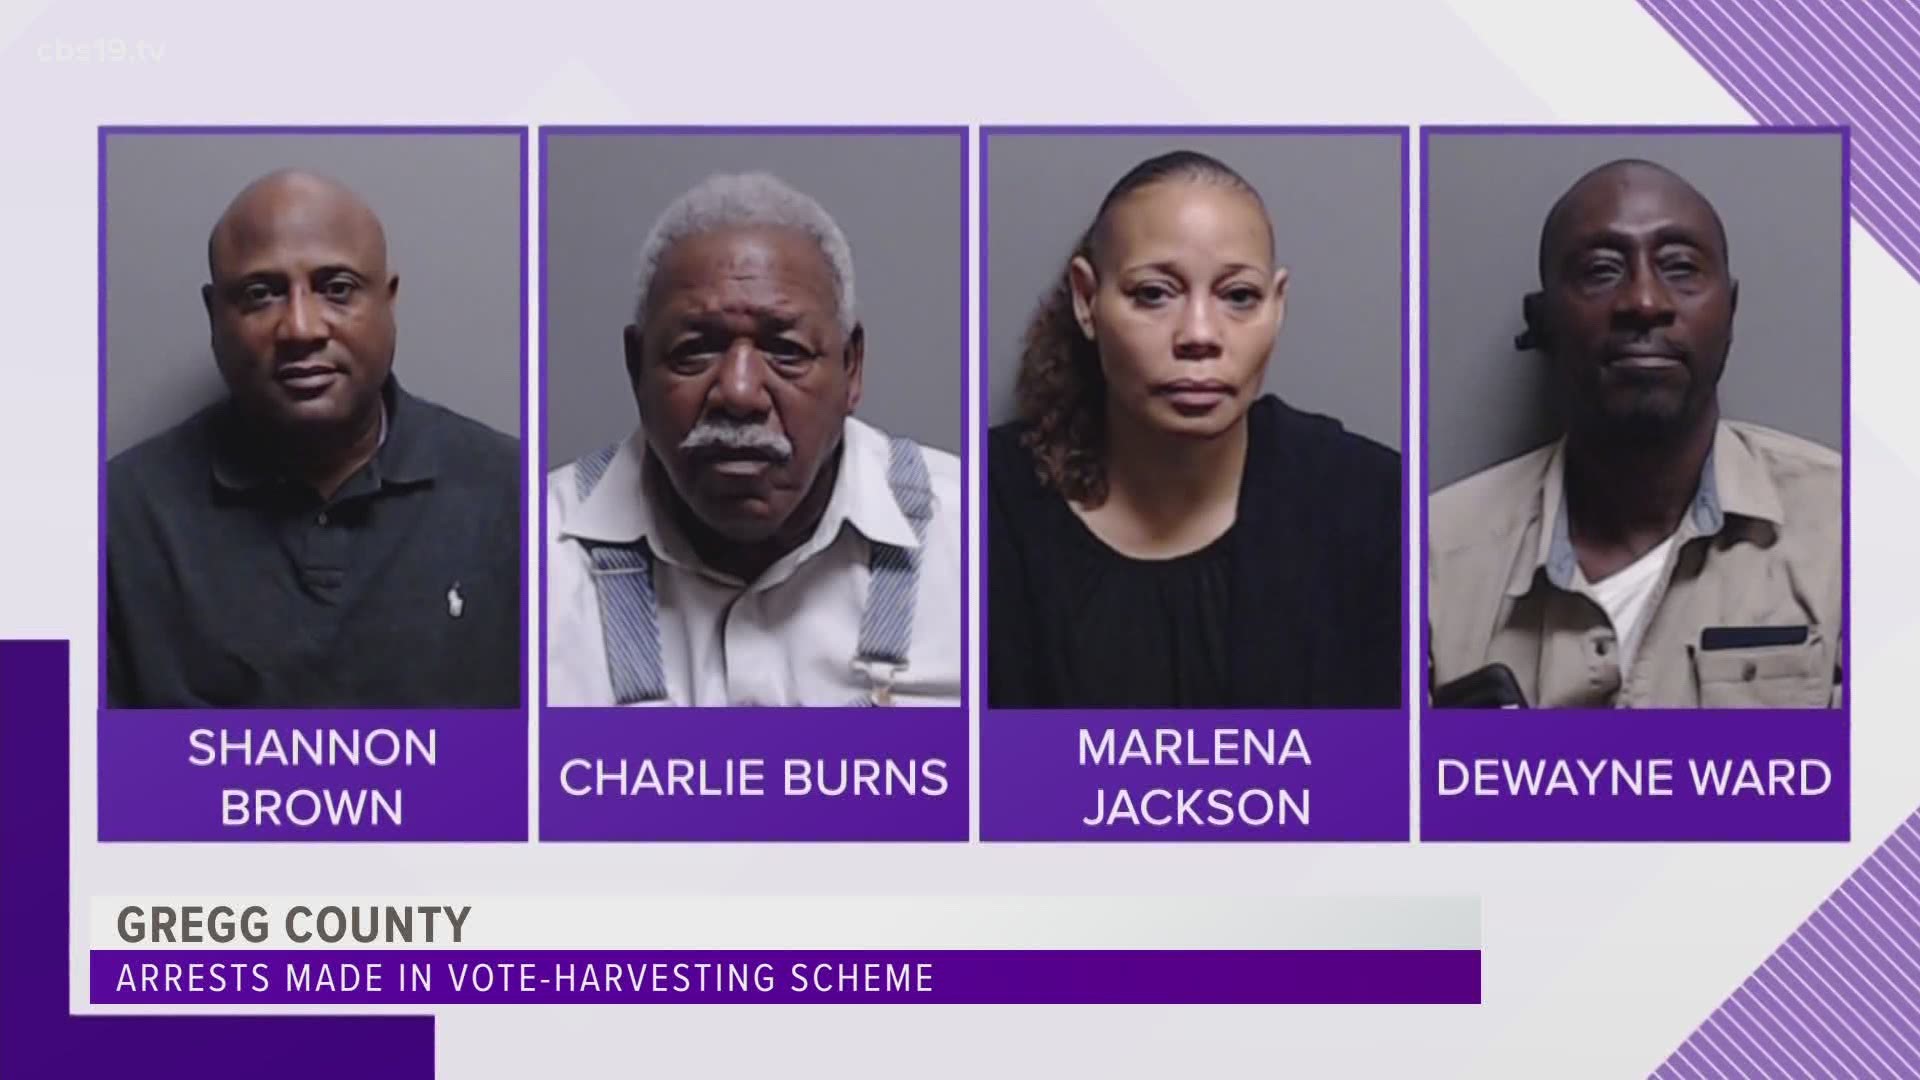 Shannon Brown, Marlena Jackson, Charlie Burns and DeWayne Ward were booked into the Gregg County Jail on a charge each of engaging in organized election fraud.